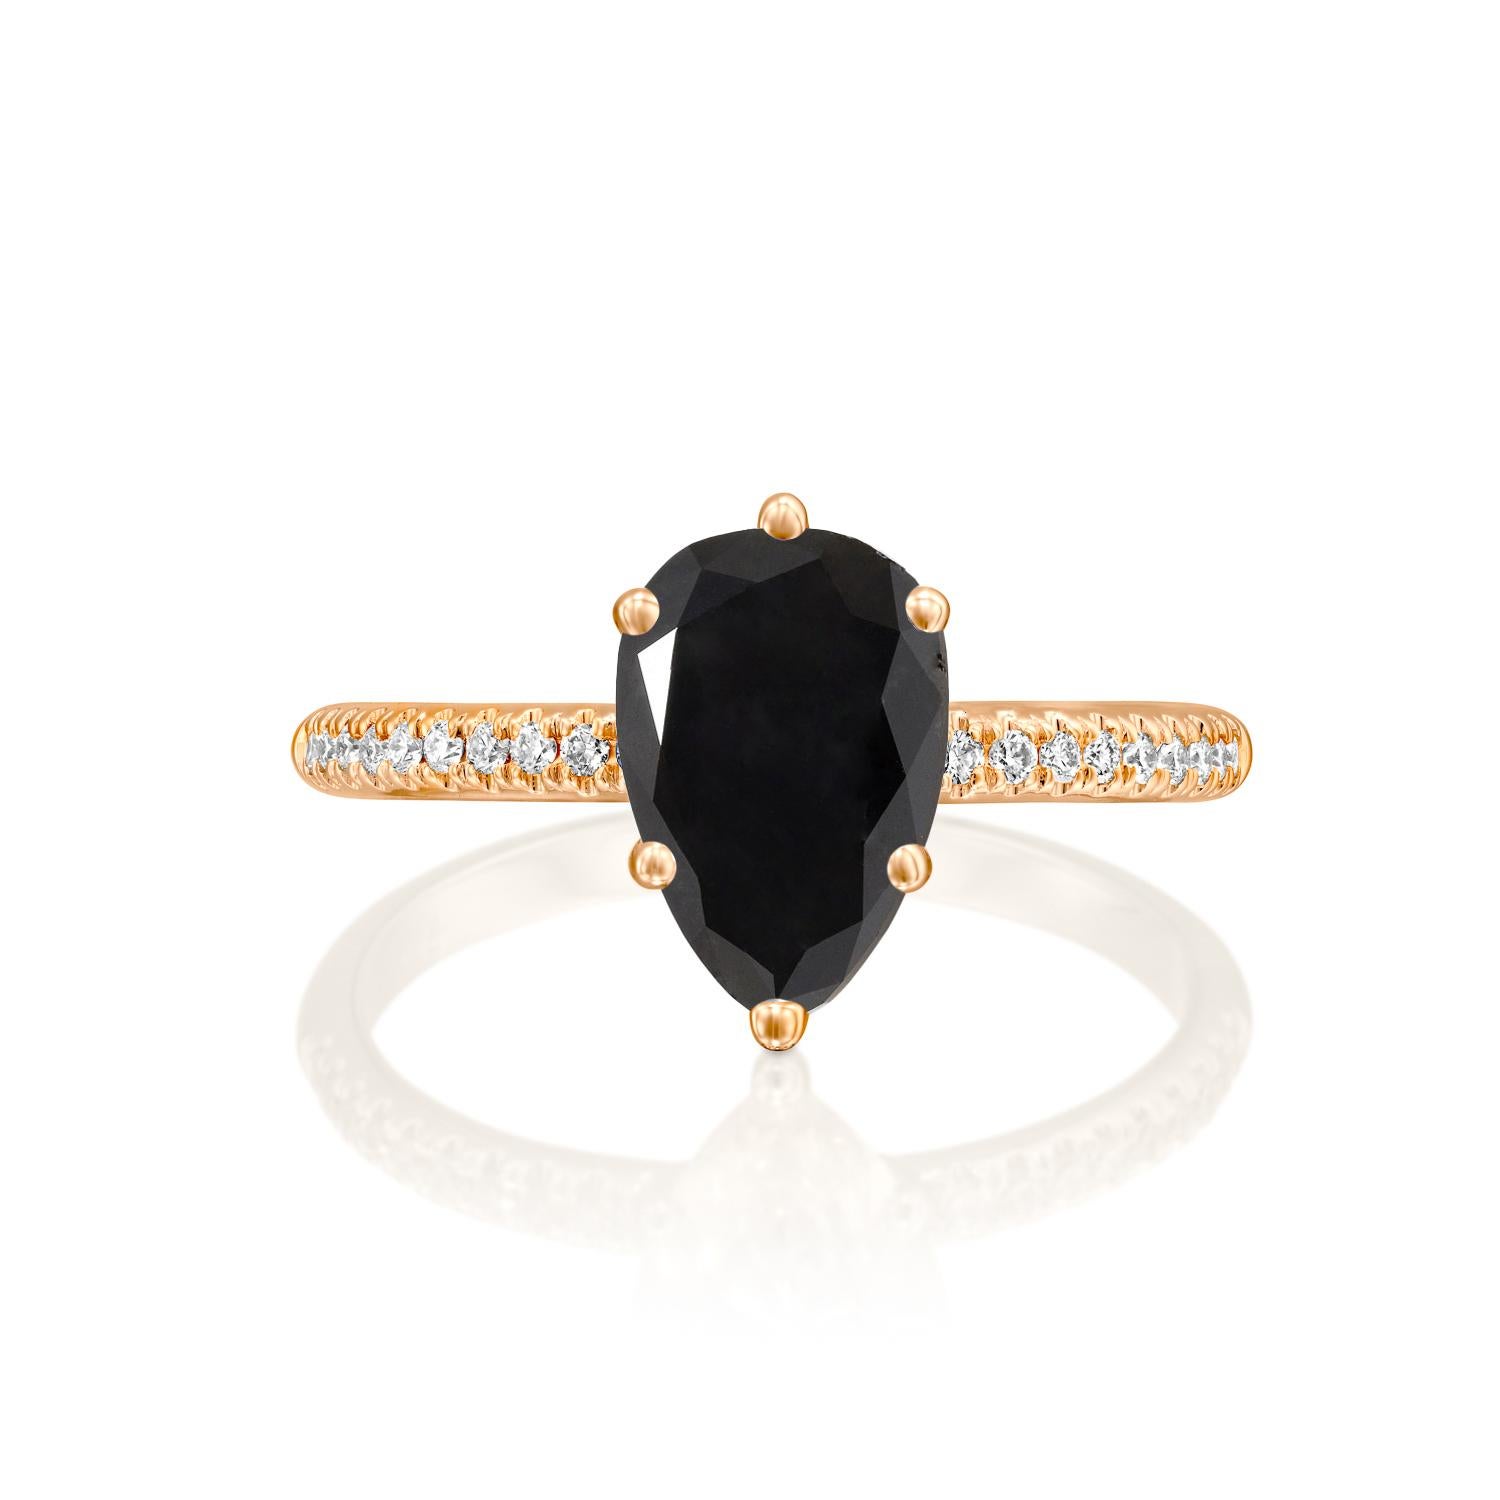 Beautiful solitaire with accents vintage style diamond engagement ring. Center stone is natural, pear shaped, AAA quality Black Diamond of 1.5 carat and it is surrounded by smaller natural diamonds approx. 0.2 total carat weight. The total carat